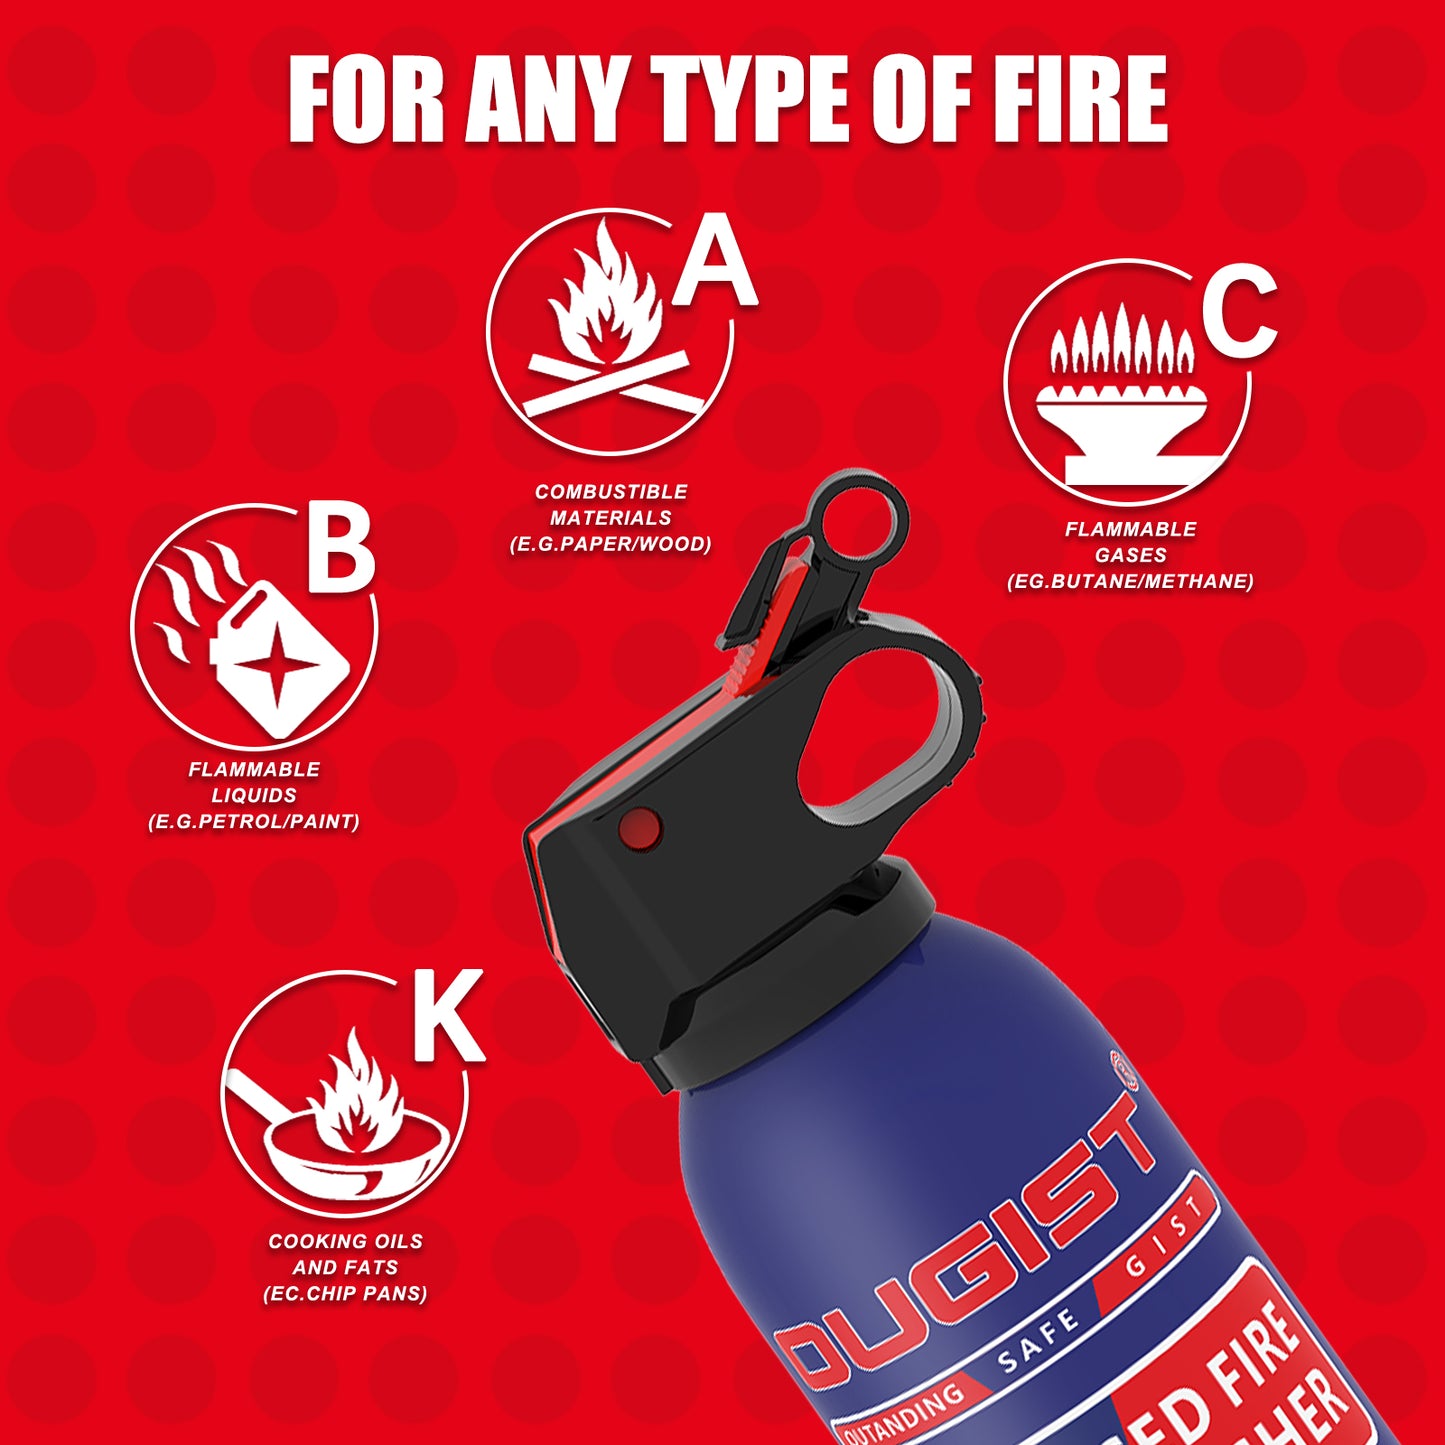 y Stop Fire Spray Extinguisher - 600g Quick-Acting Powder for Home, Car, Garage, Kitchen, 1A:10B:C:K Portable & Mess-Free Solution for Electrical, Grease Fires & More - 2 Pack